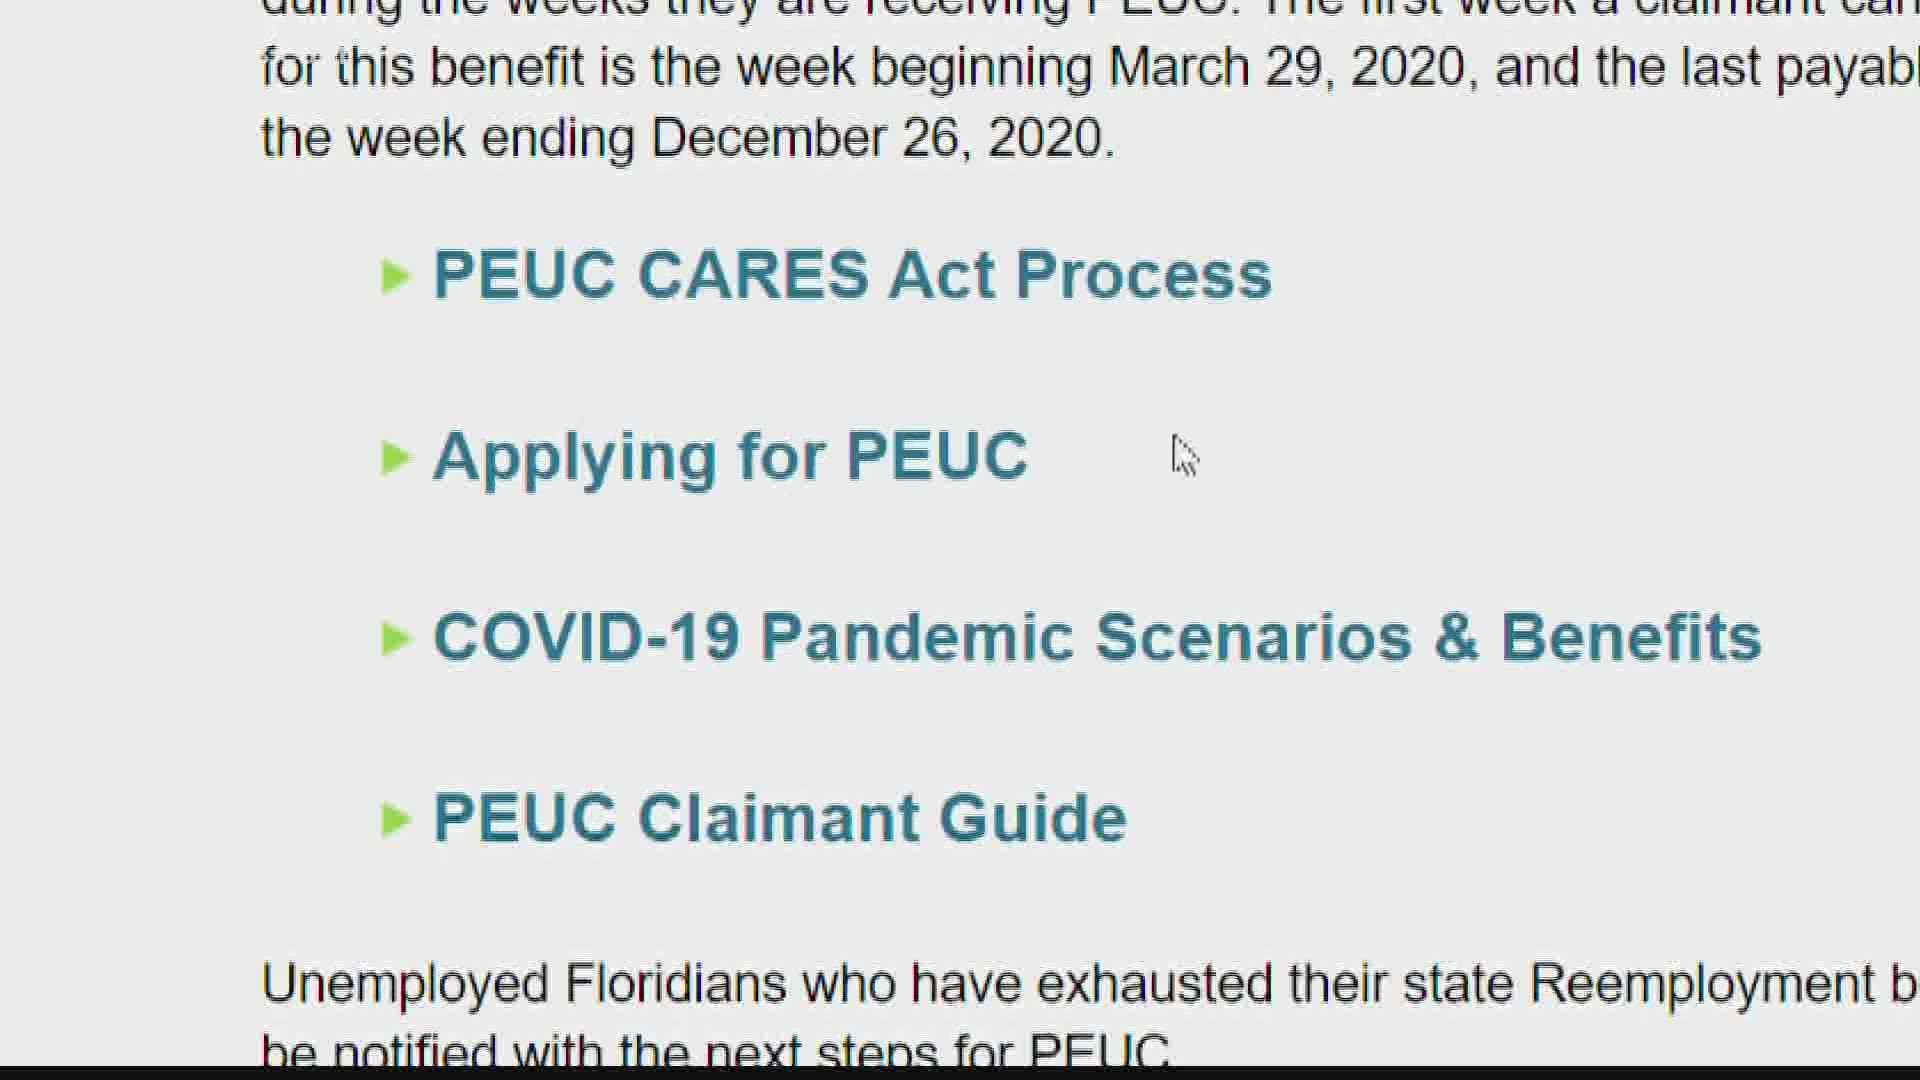 PEUC applications are finally available on CONNECT.